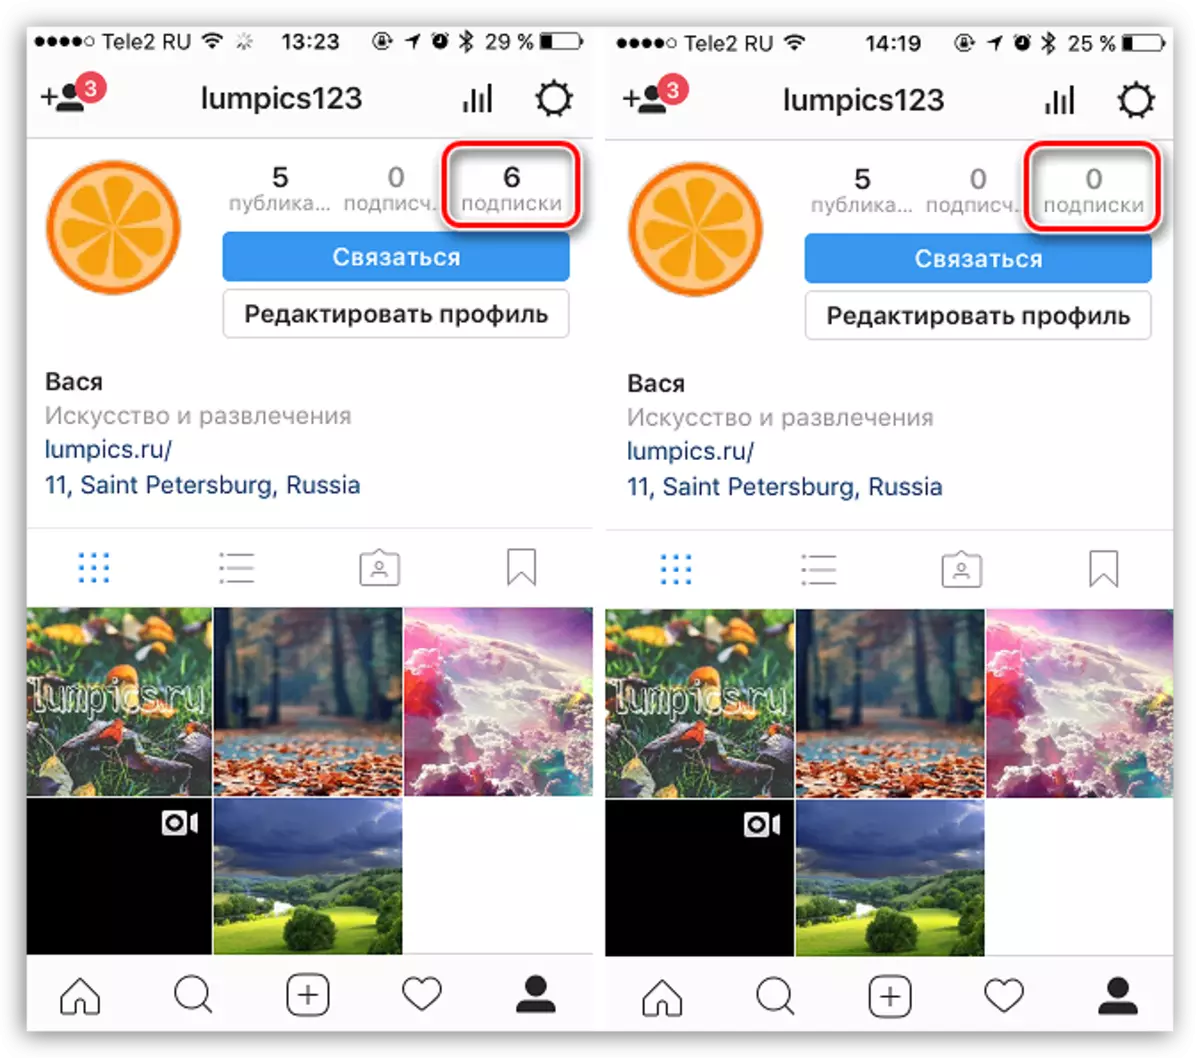 How to unsubscribe from Instagram users